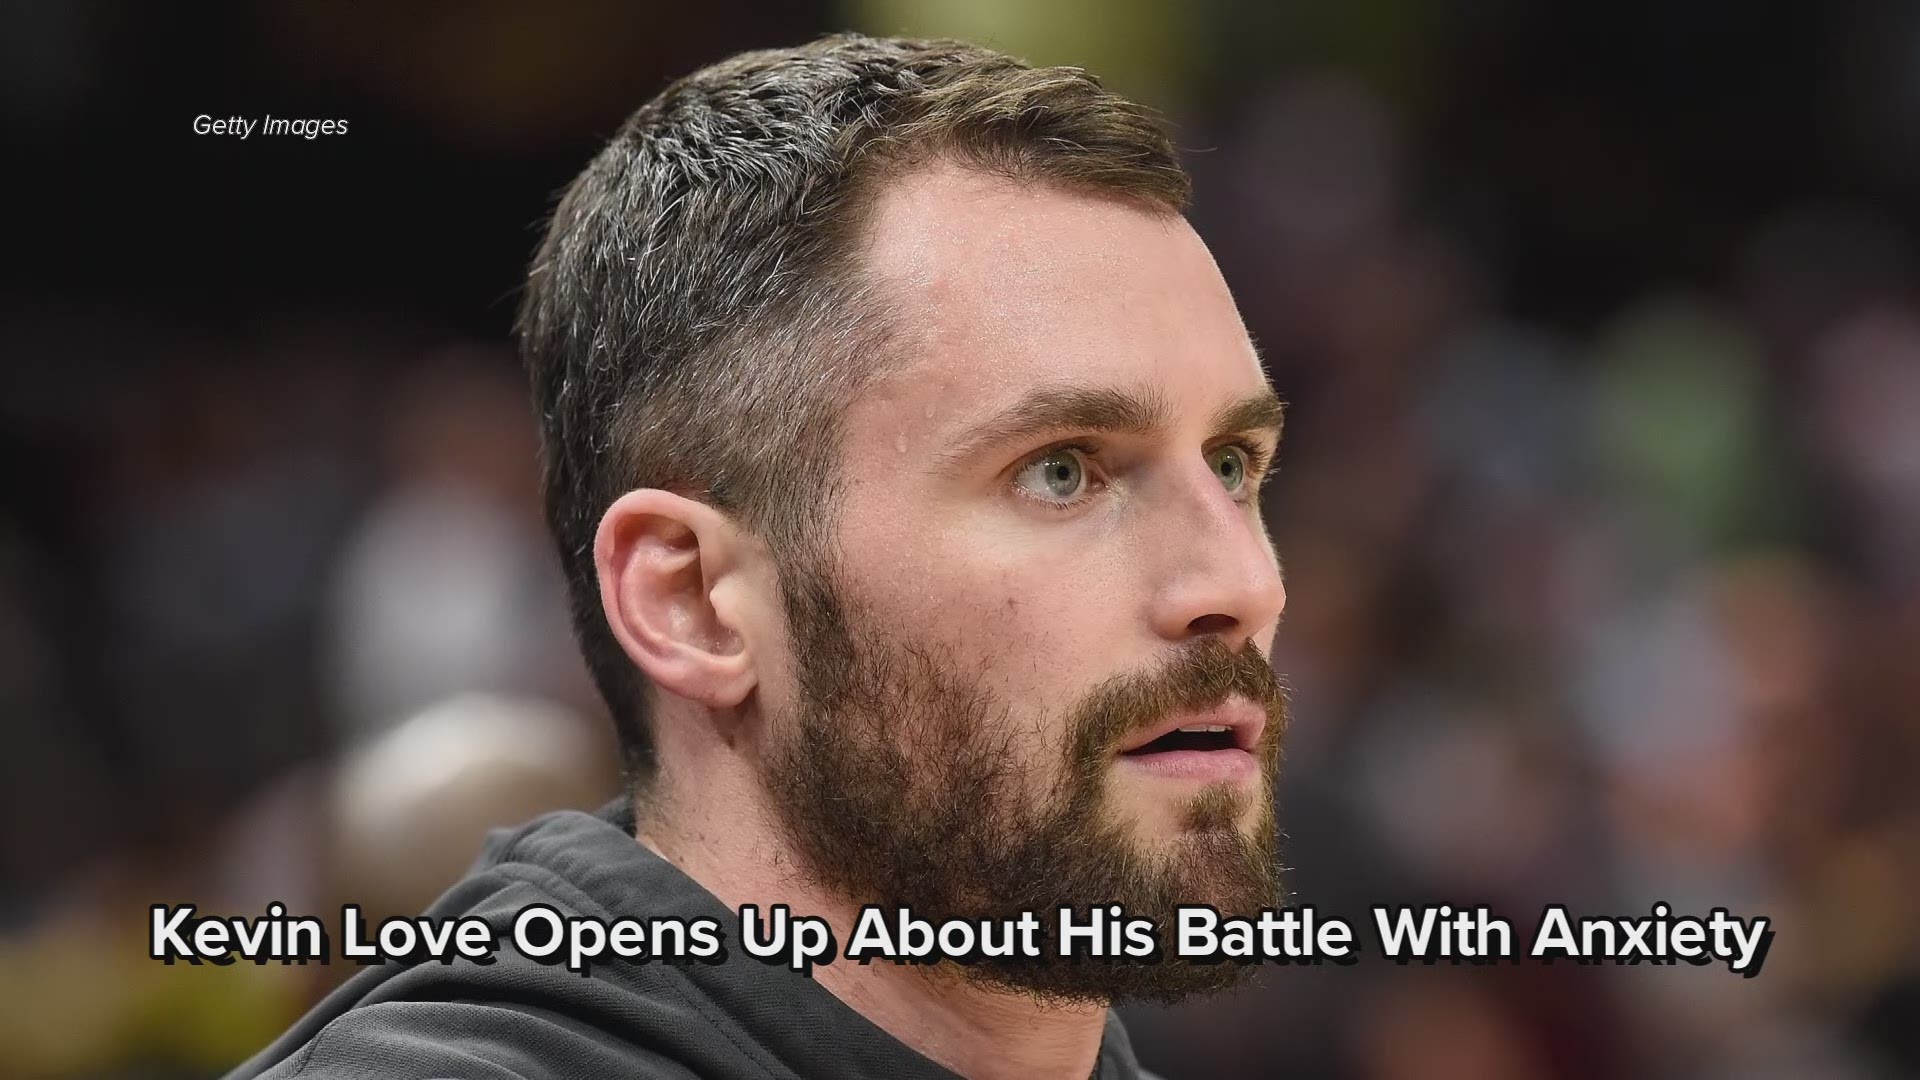 WATCH: Cleveland Cavaliers' Kevin Love discusses mental health with Carson Daly on 'Today'